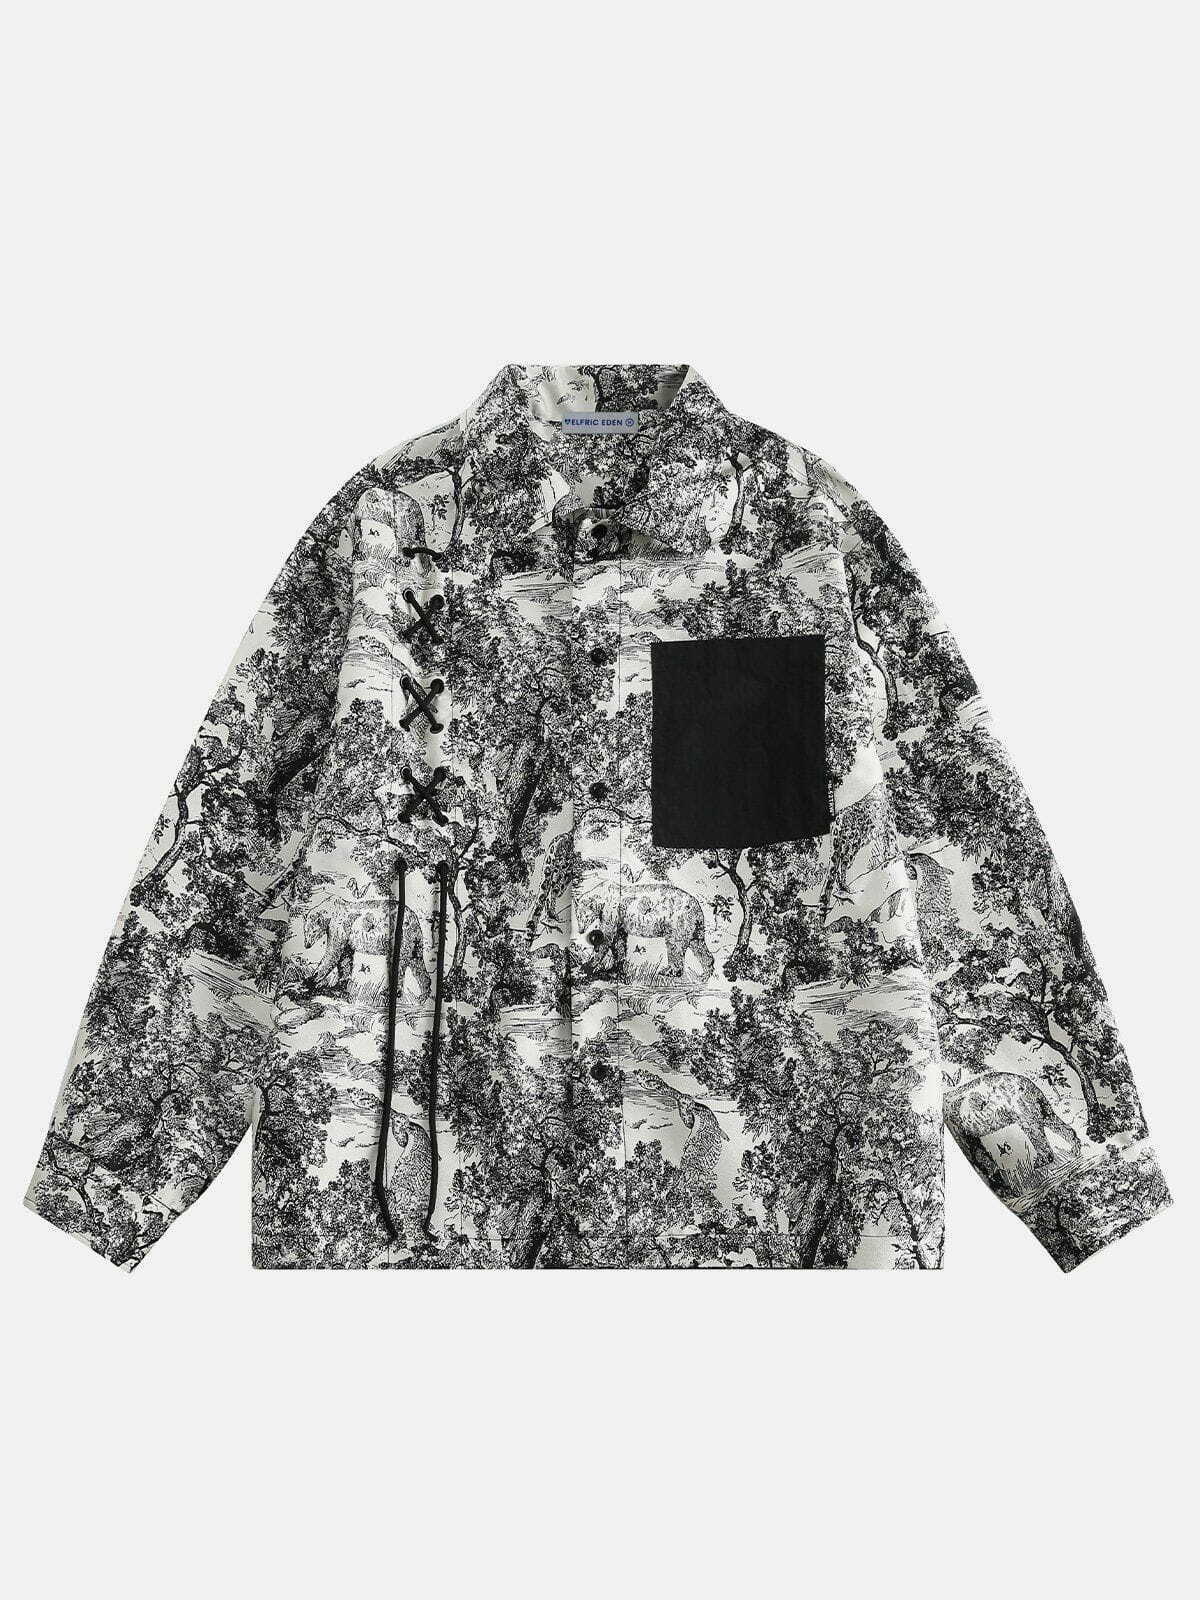 vibrant all over print shirt   youthful long sleeve design 6447